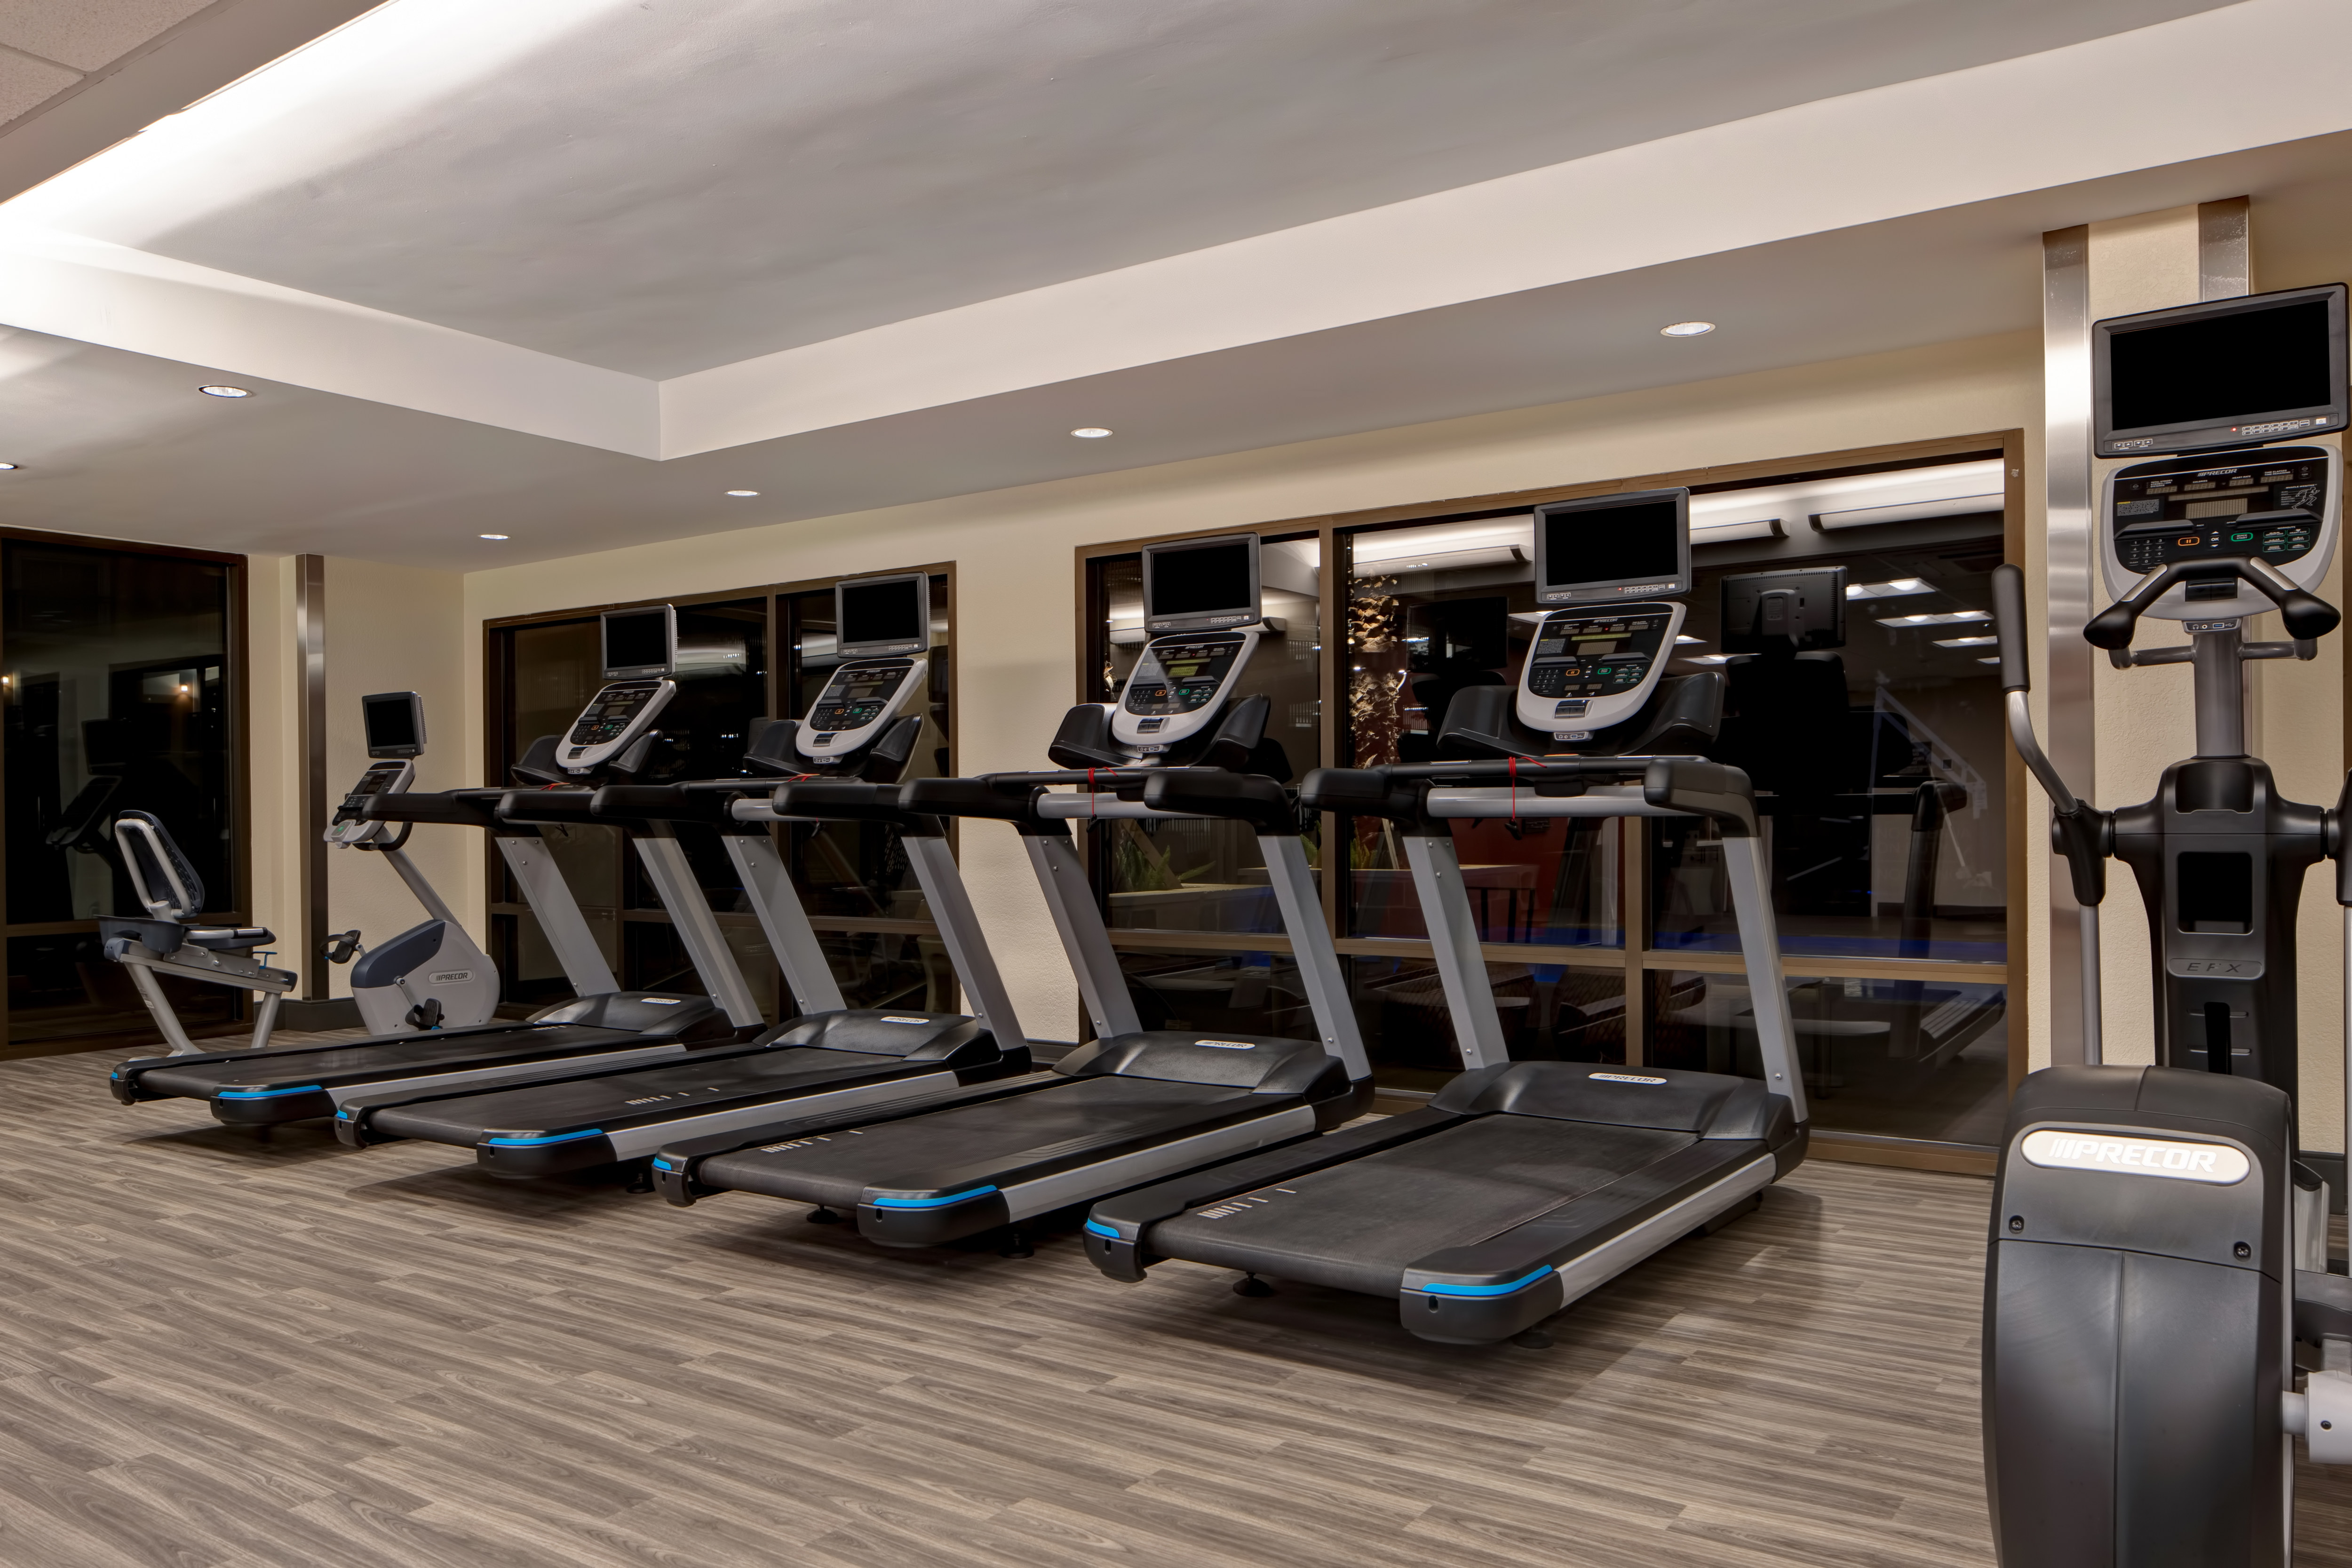 fitness center with machines and weights